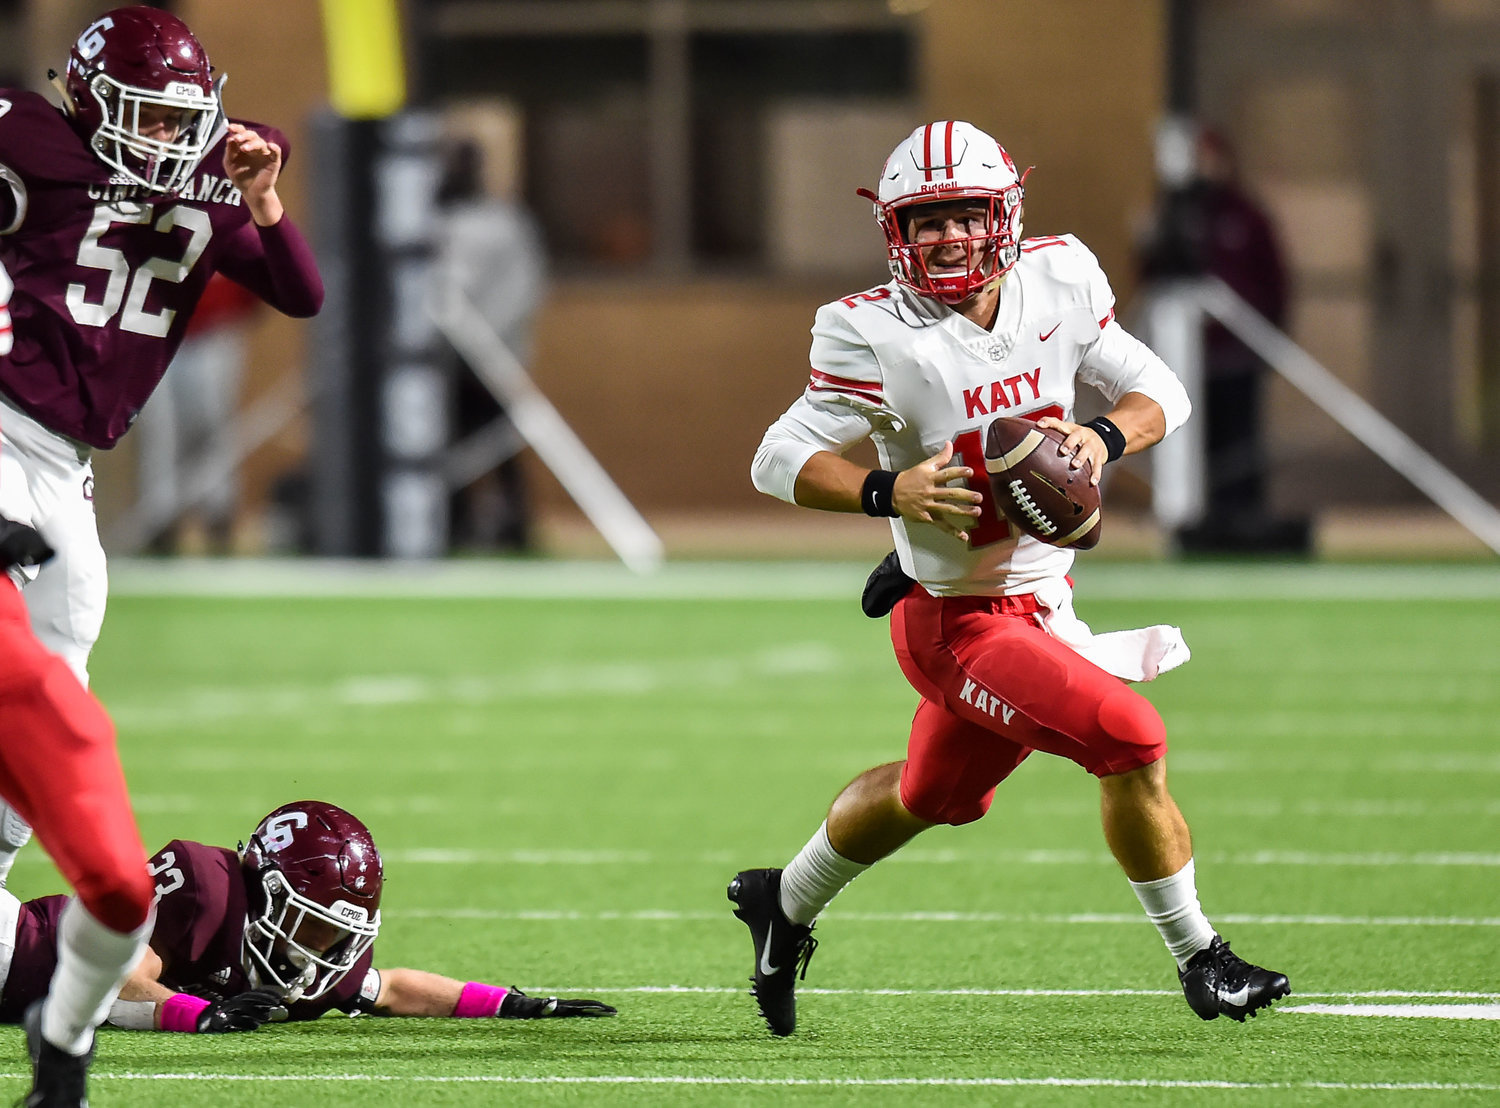 Senior Bronson McClelland returns to run the Katy Tigers’ offense as a top-25 quarterback recruit according to “Dave Campbell’s Texas Football Magazine.” Pictured is McClelland escaping the pocket during a conference game between Katy and the Cinco Ranch Cougars at Legacy Stadium Oct. 25, 2019.